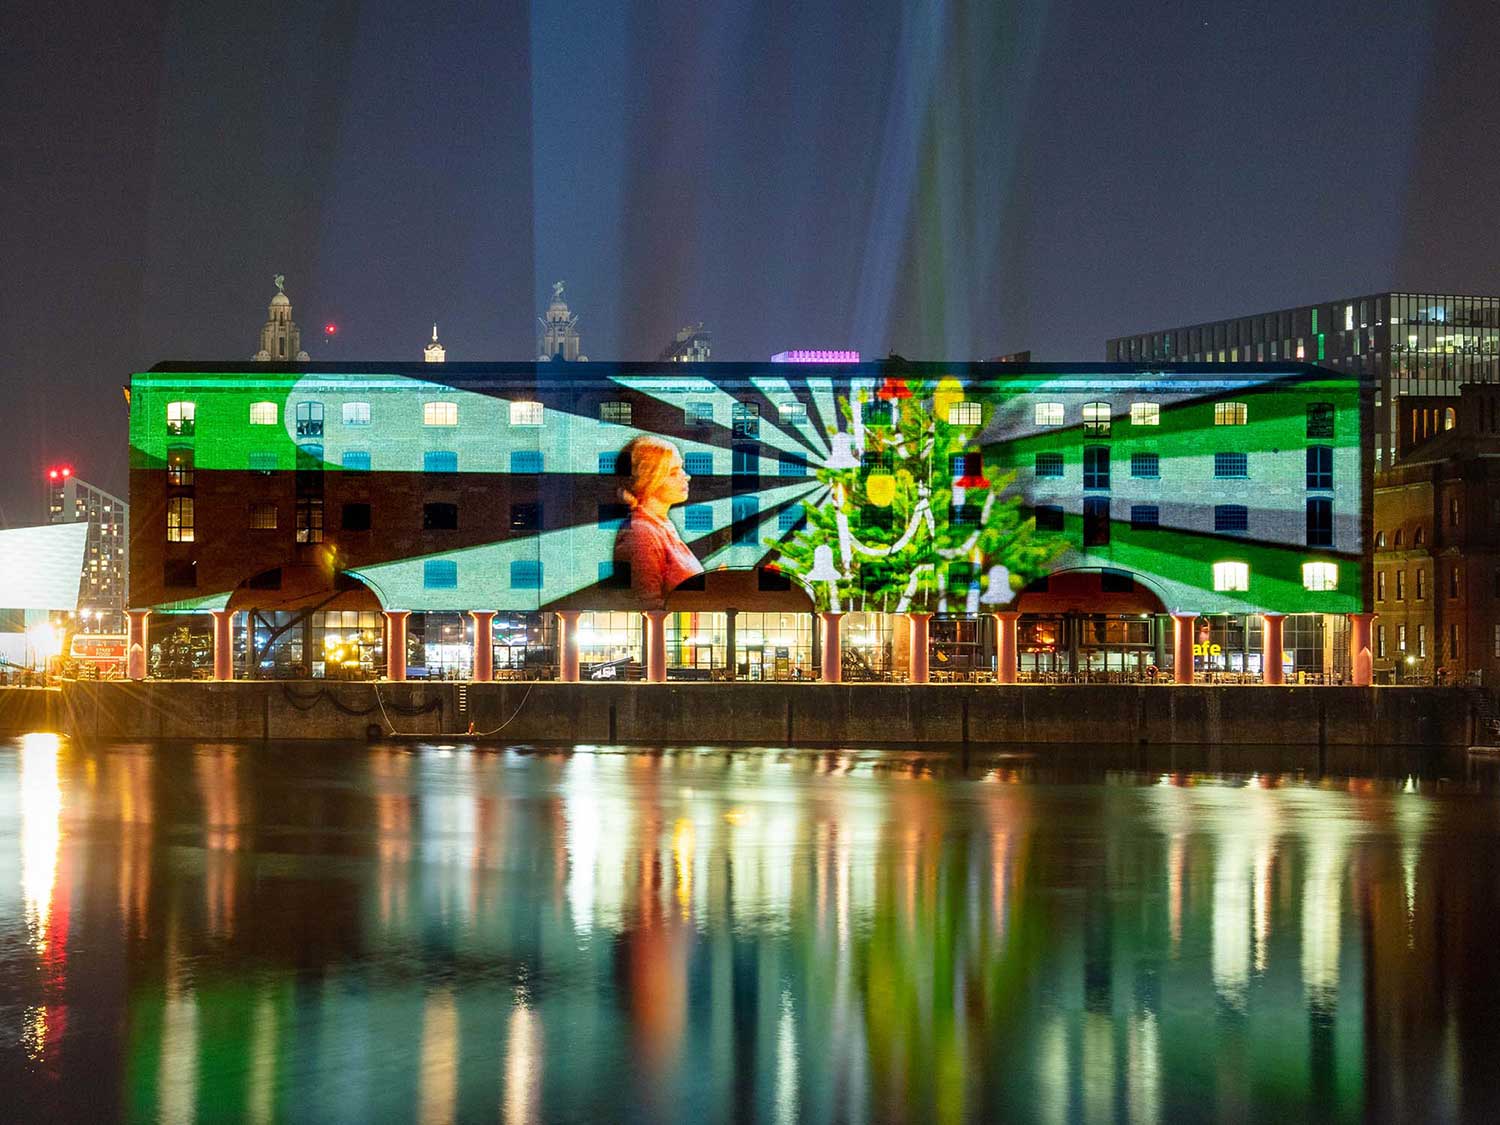 Liverpool Albert Dock Christmas Projection mapped light show